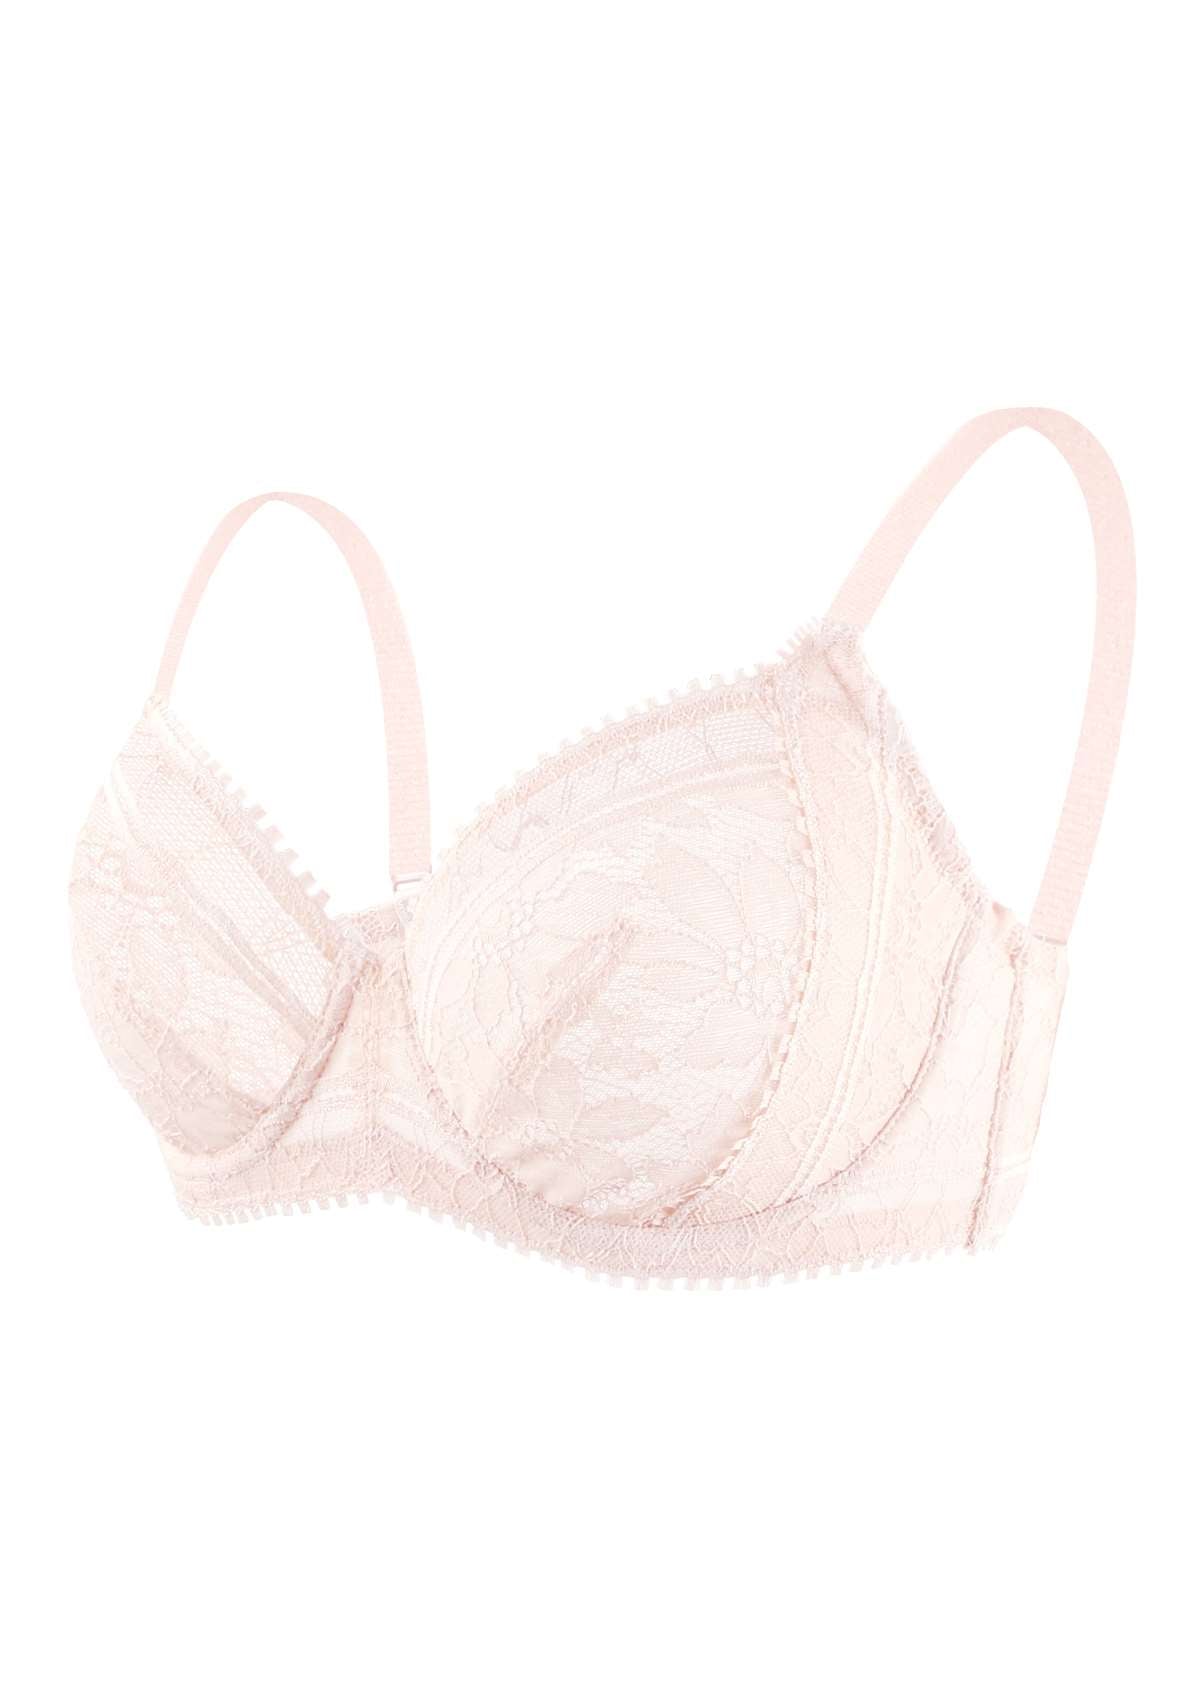 HSIA Silene Floral Delicate Unlined Lace Soft Cup Uplift Bra - Champagne / 34 / DD/E